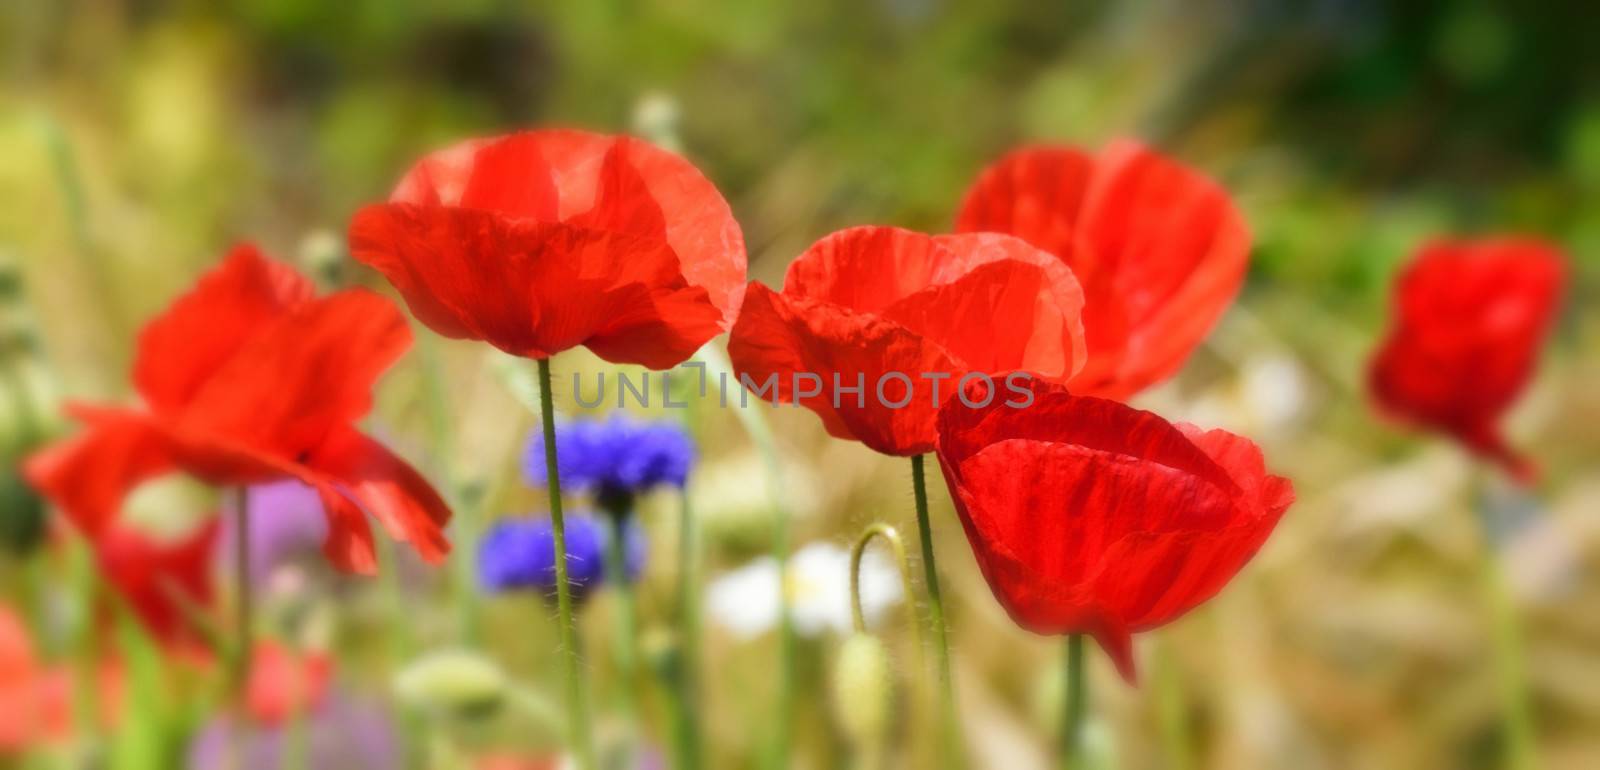 Poppies in English Country Garden. by george_stevenson